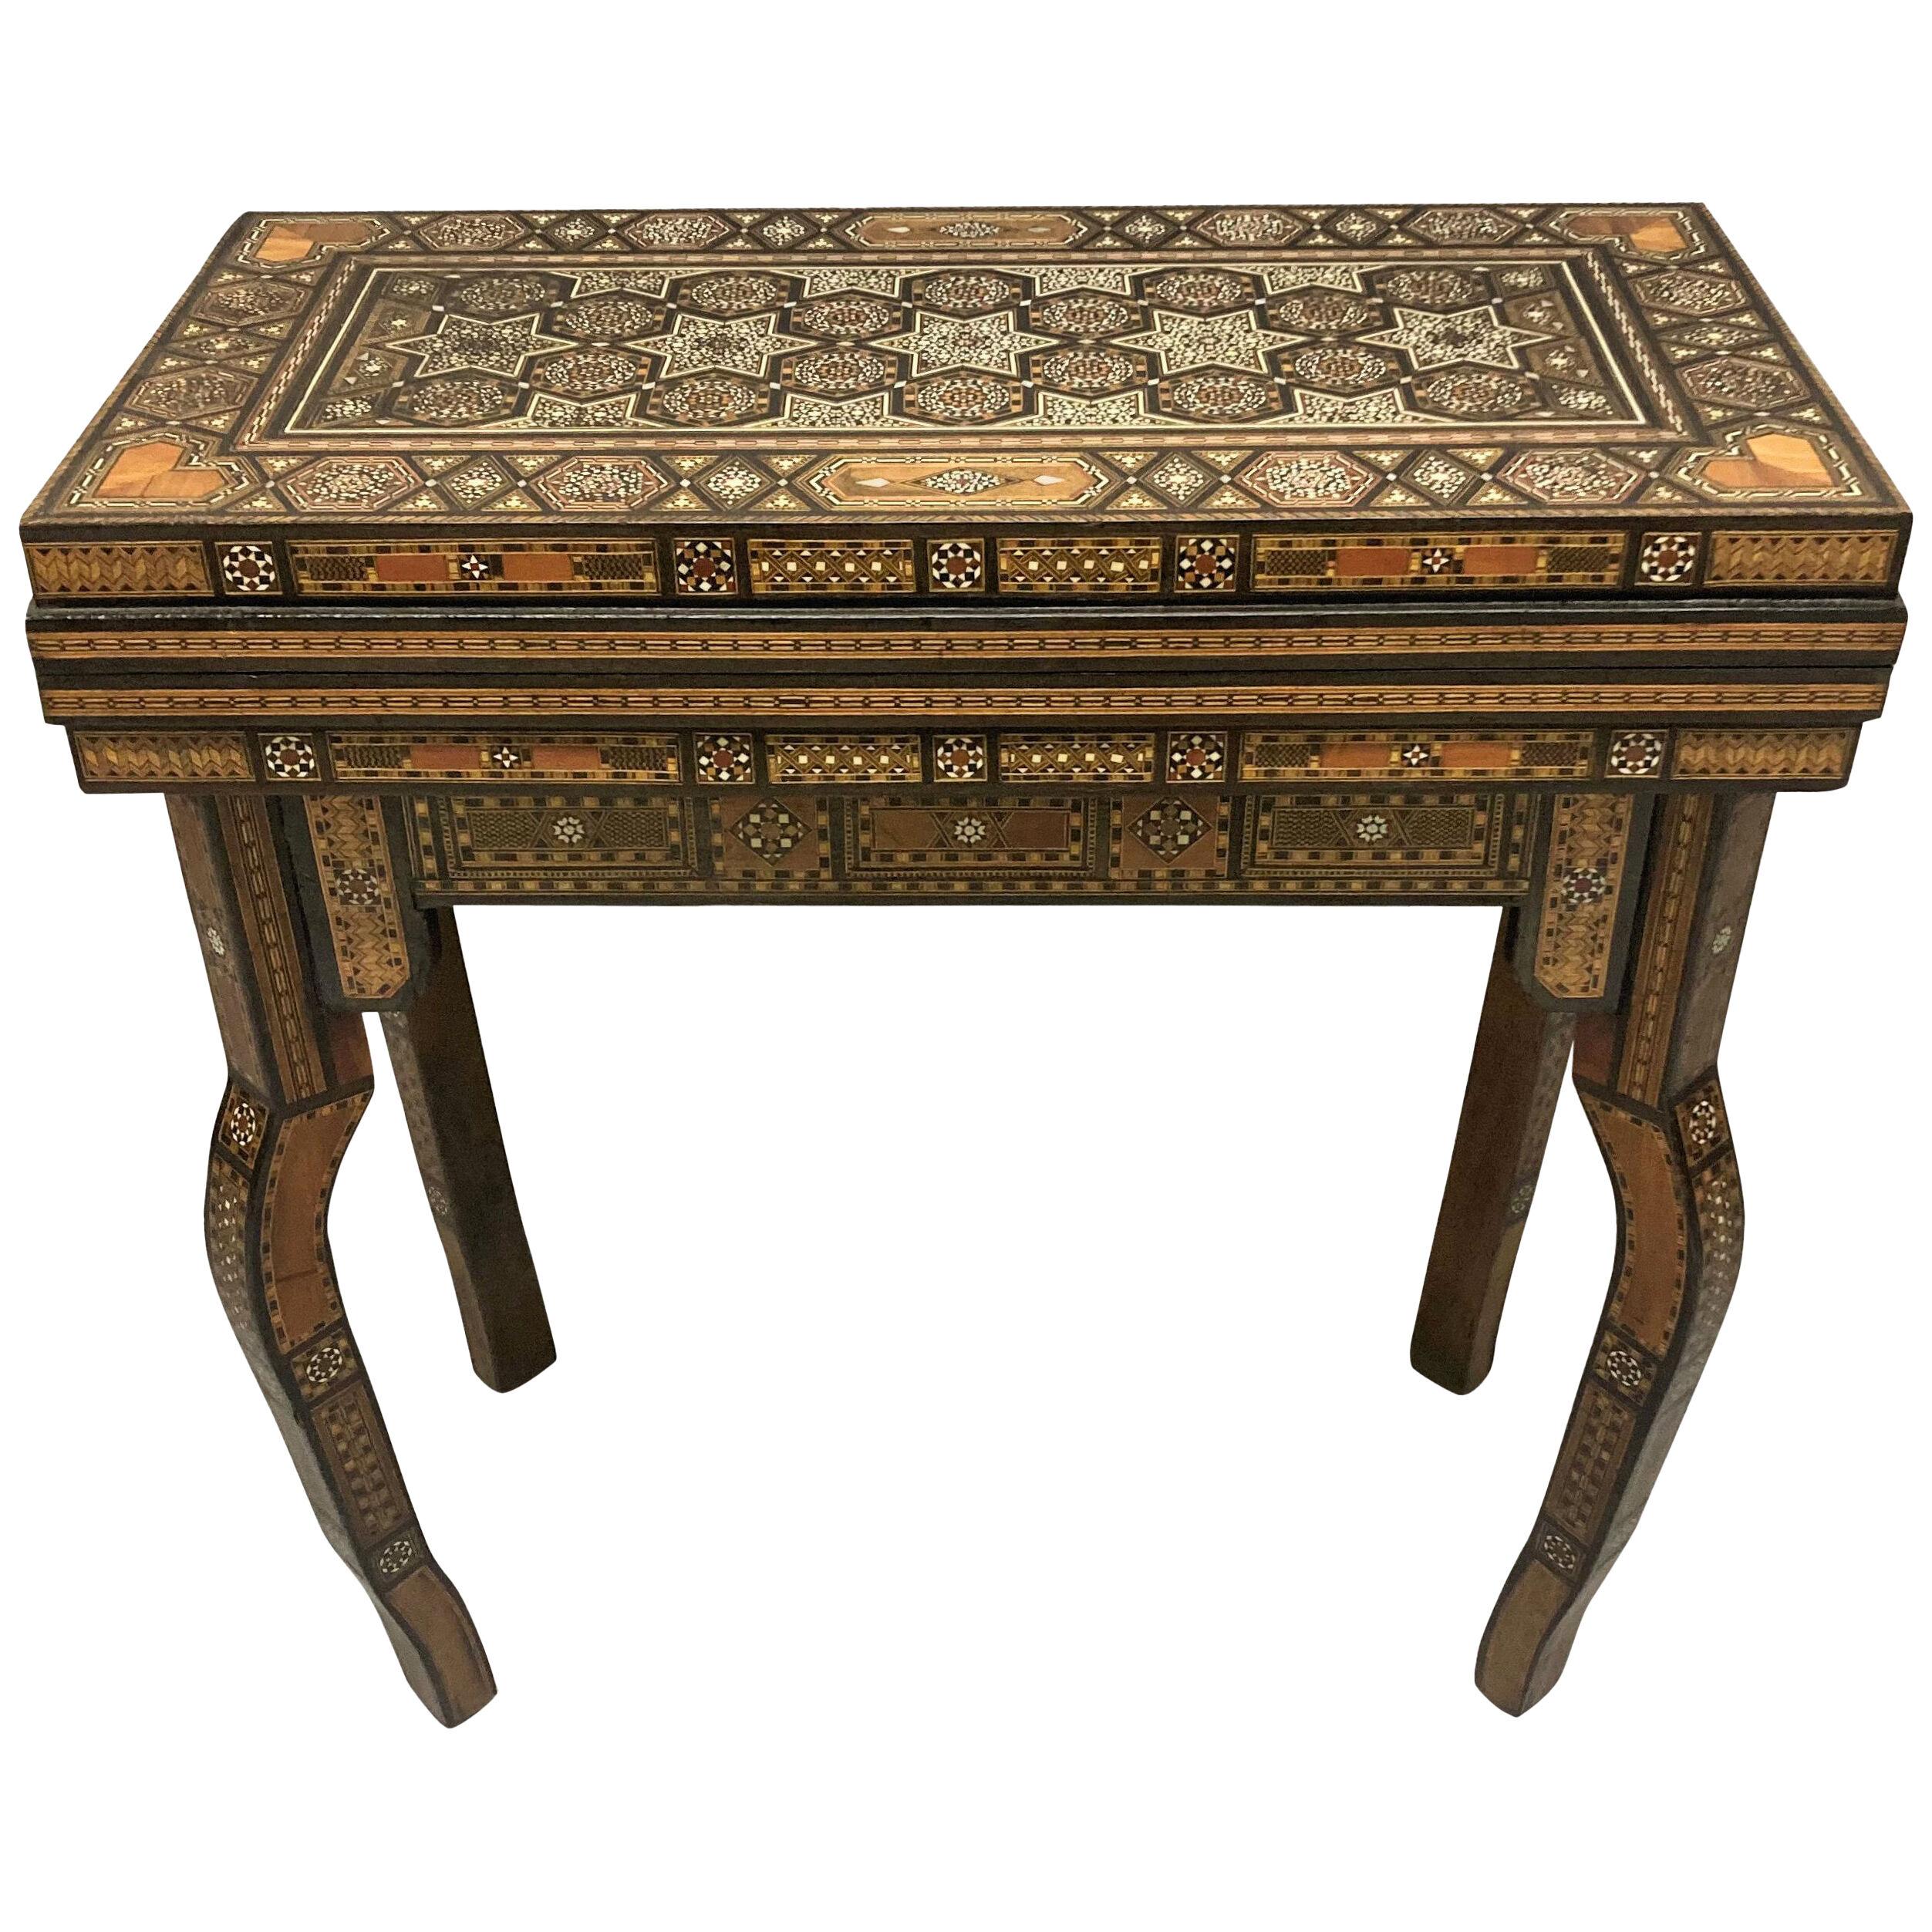 A SYRIAN INLAID GAMES TABLE